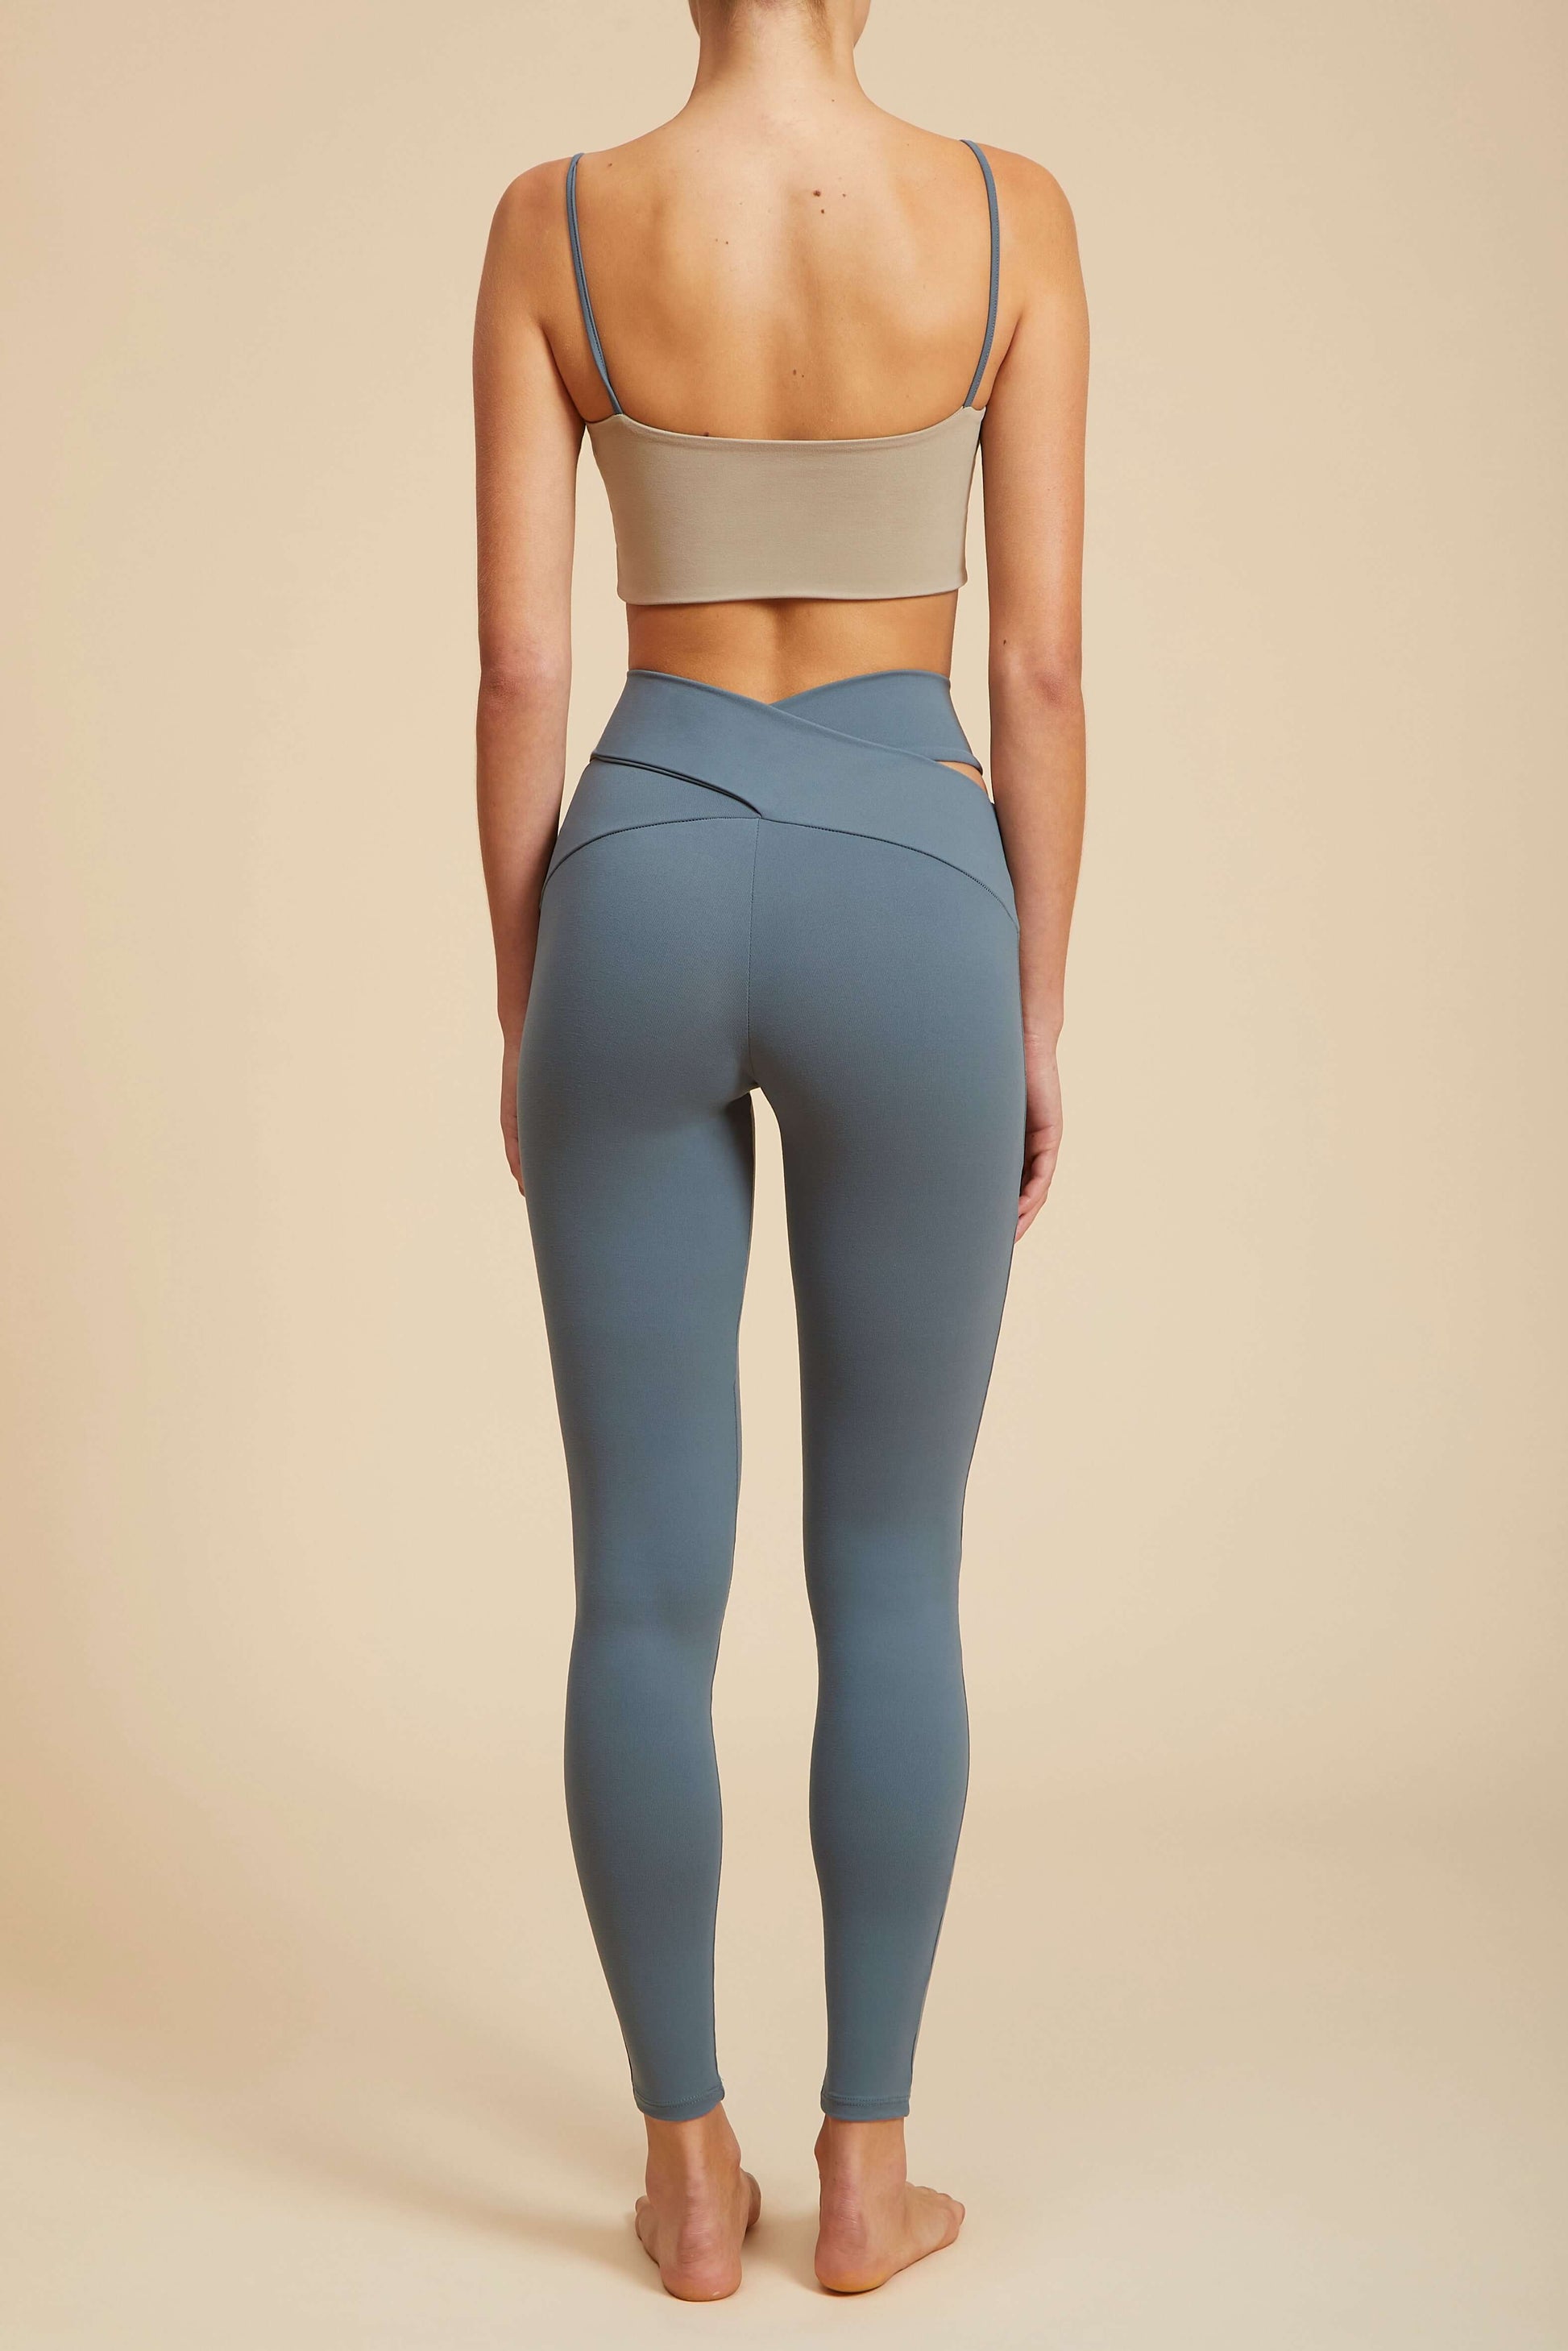 Live The Process Orion Legging. Over the moon. Truly, madly, deeply we're in love with our Orion Legging—our statement style featuring a criss-cross waist that works wonders on all bodies. Elegantly cut (and cut-out), your legs will thank us.